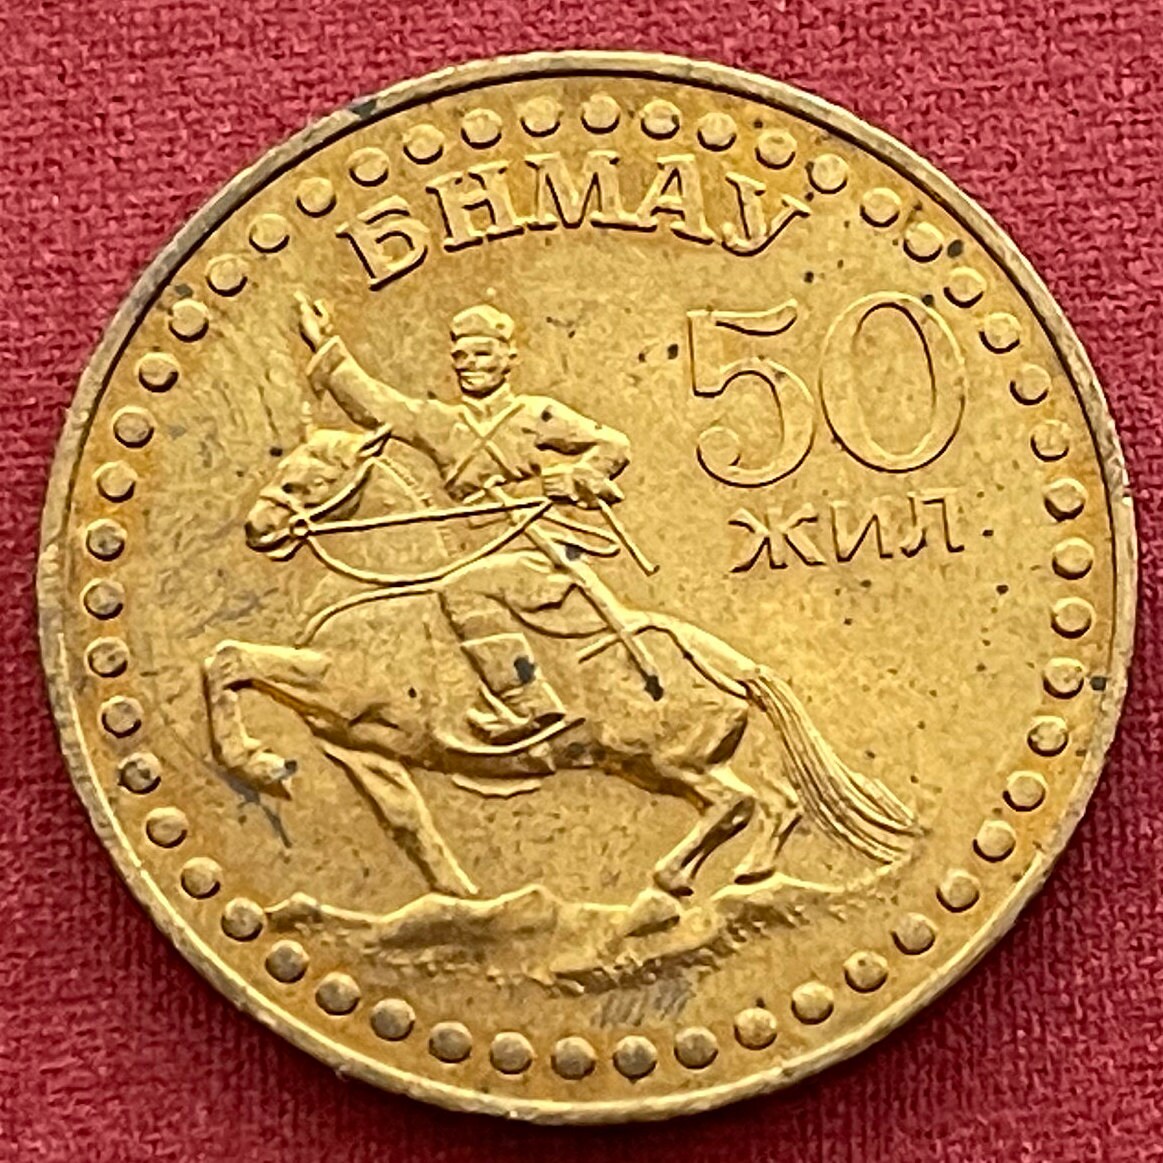 Revolutionary Damdin Sükhbaatar on Horse 1 Tögrög Mongolia Authentic Coin Money for Jewelry (Father of the Revolution) 50 Anniversary (1971)